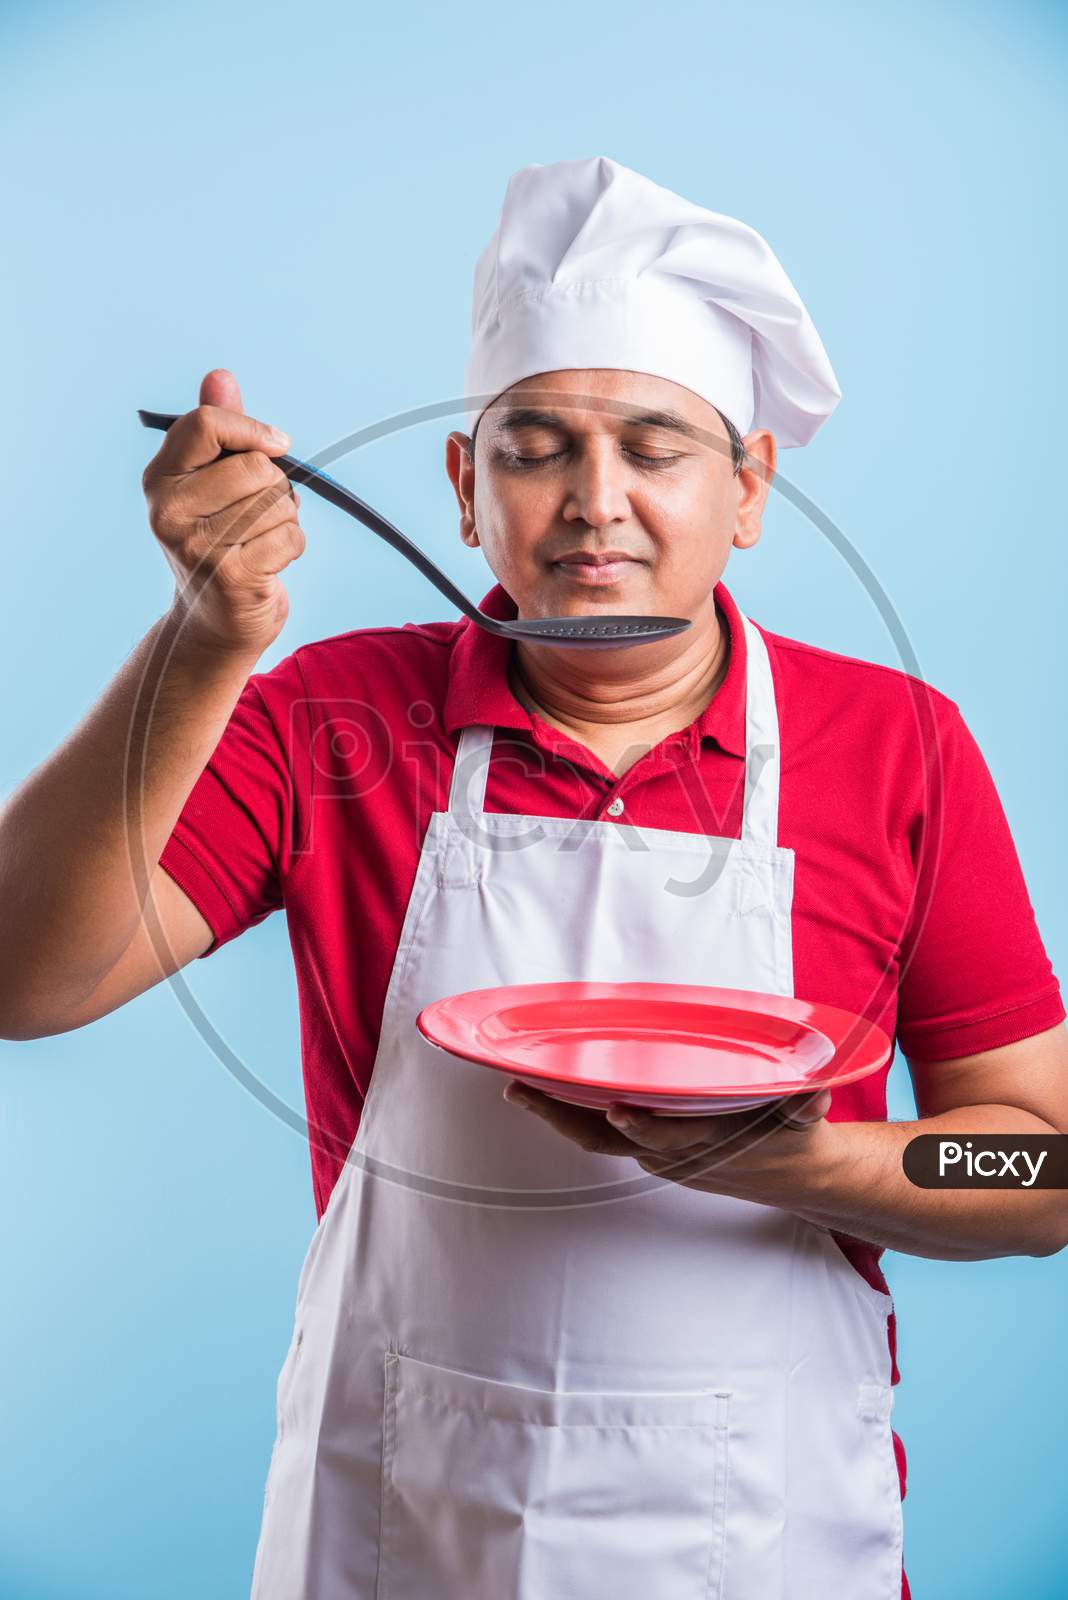 Image Of Indian Male Chef Cook In Apron And Wearing Hat Ou932065 Picxy 